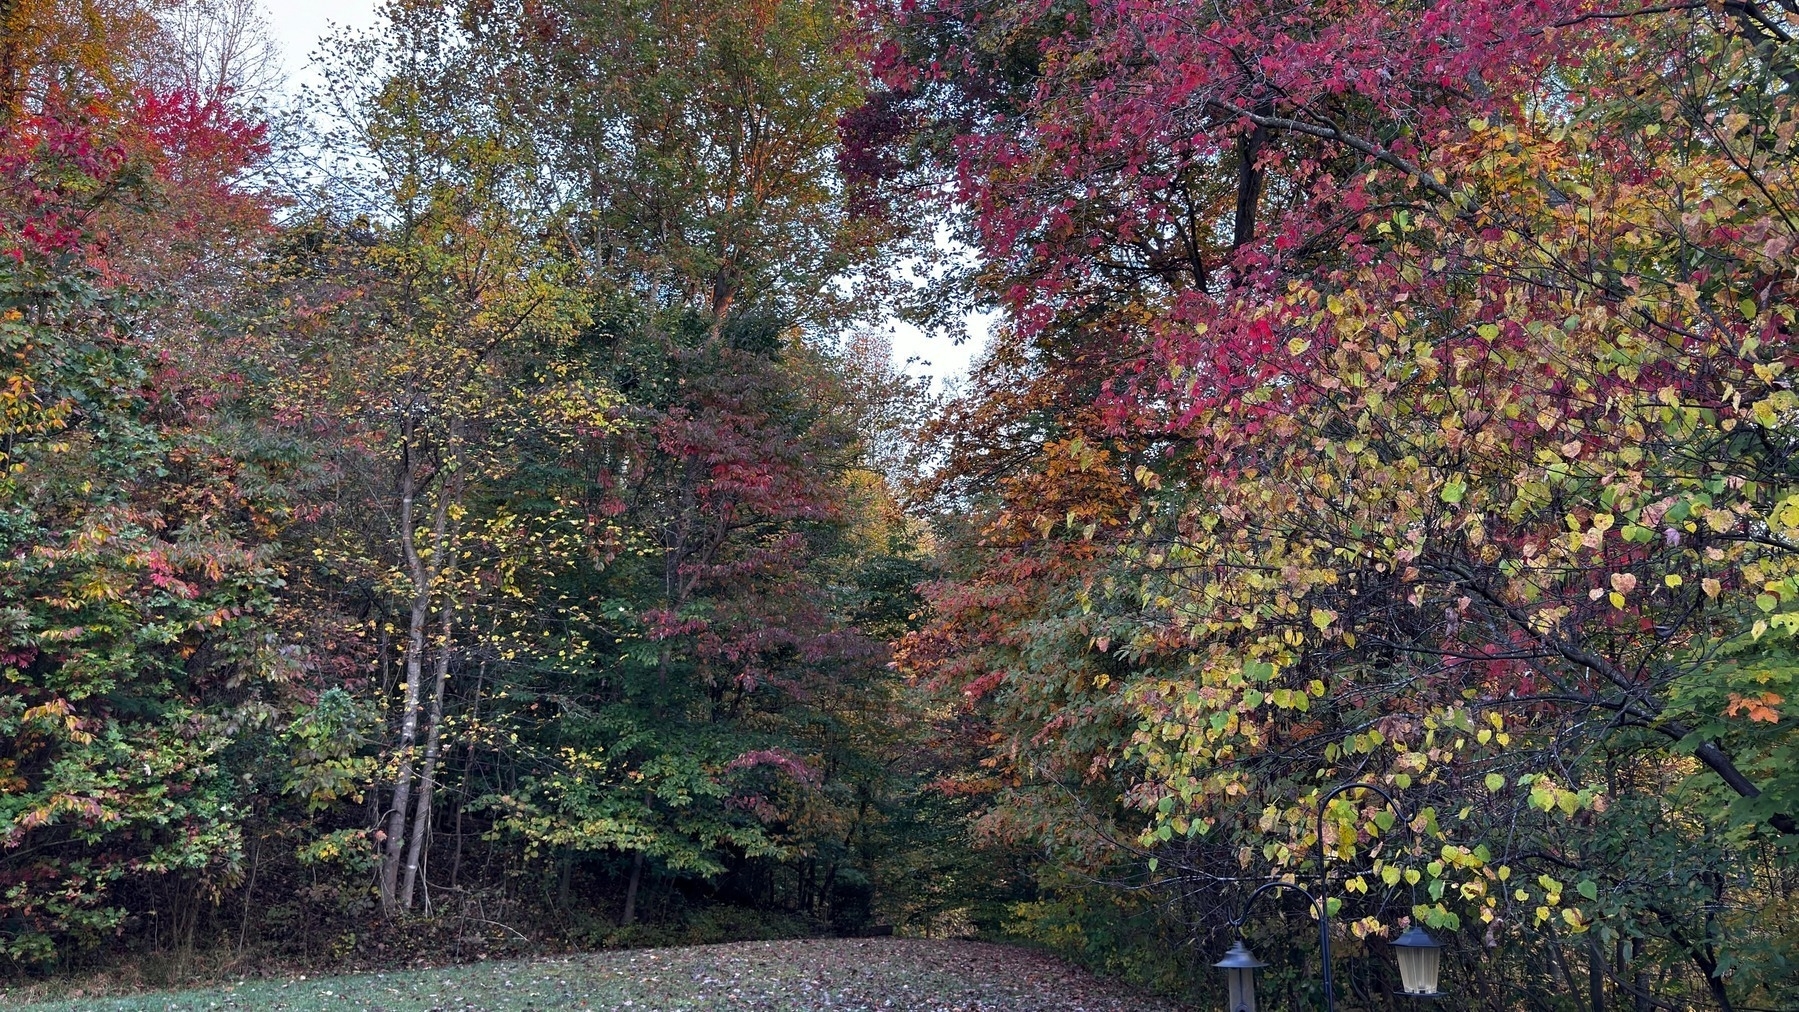 The colorful fall trees in my backyard